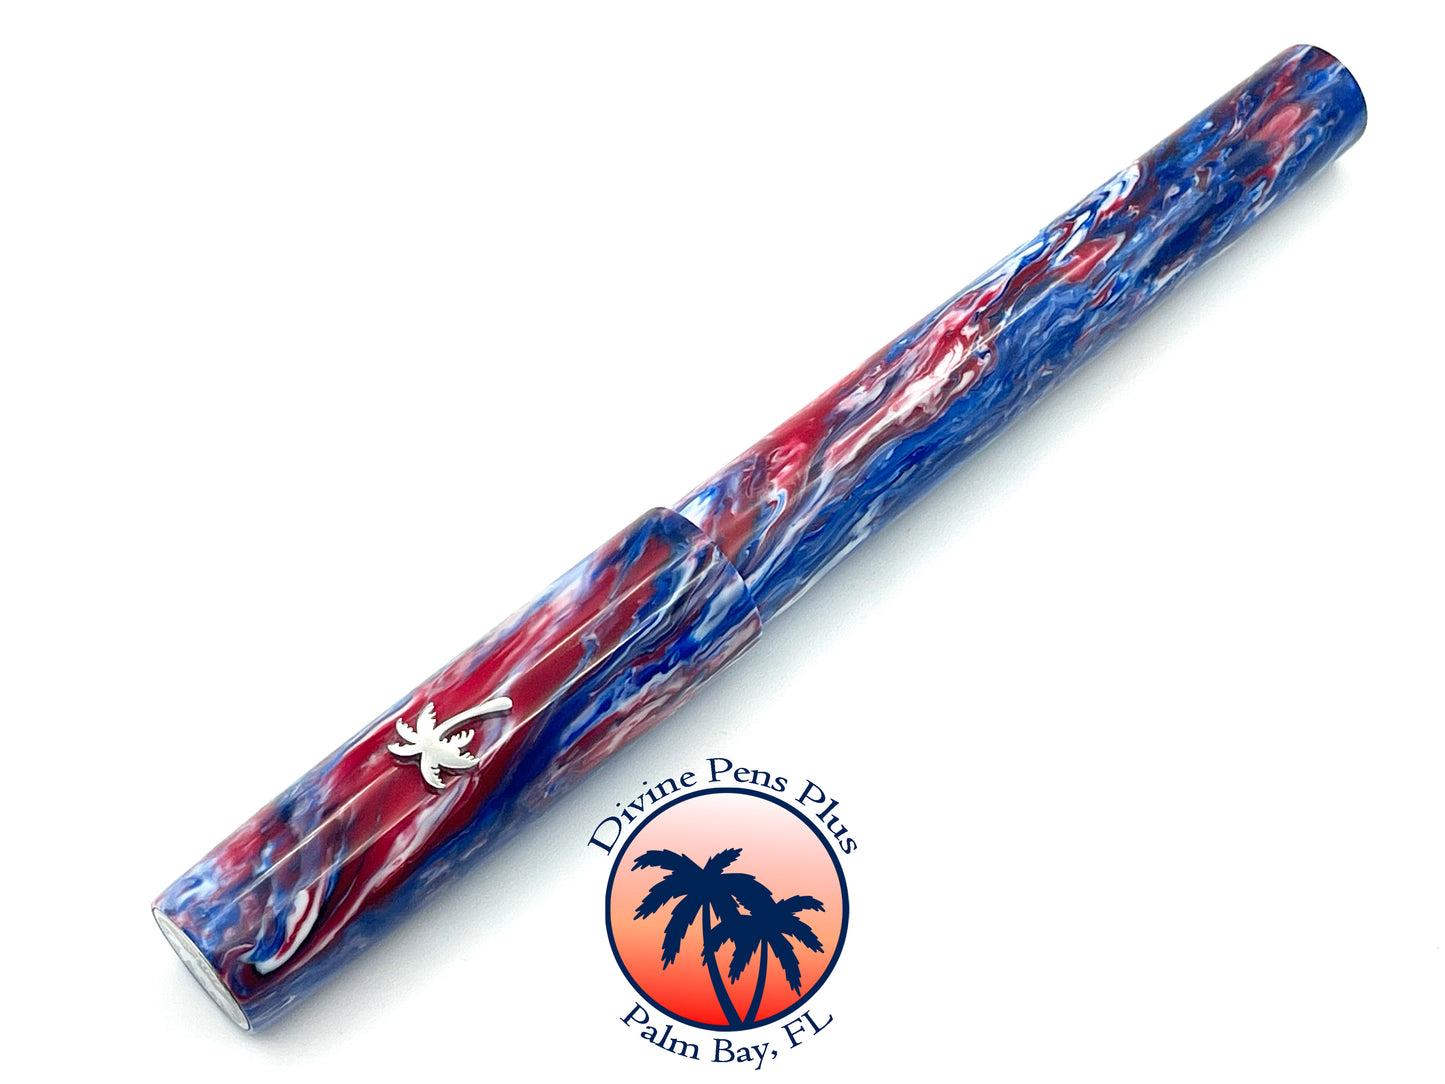 Spes Fountain Pen - "Independence Day"